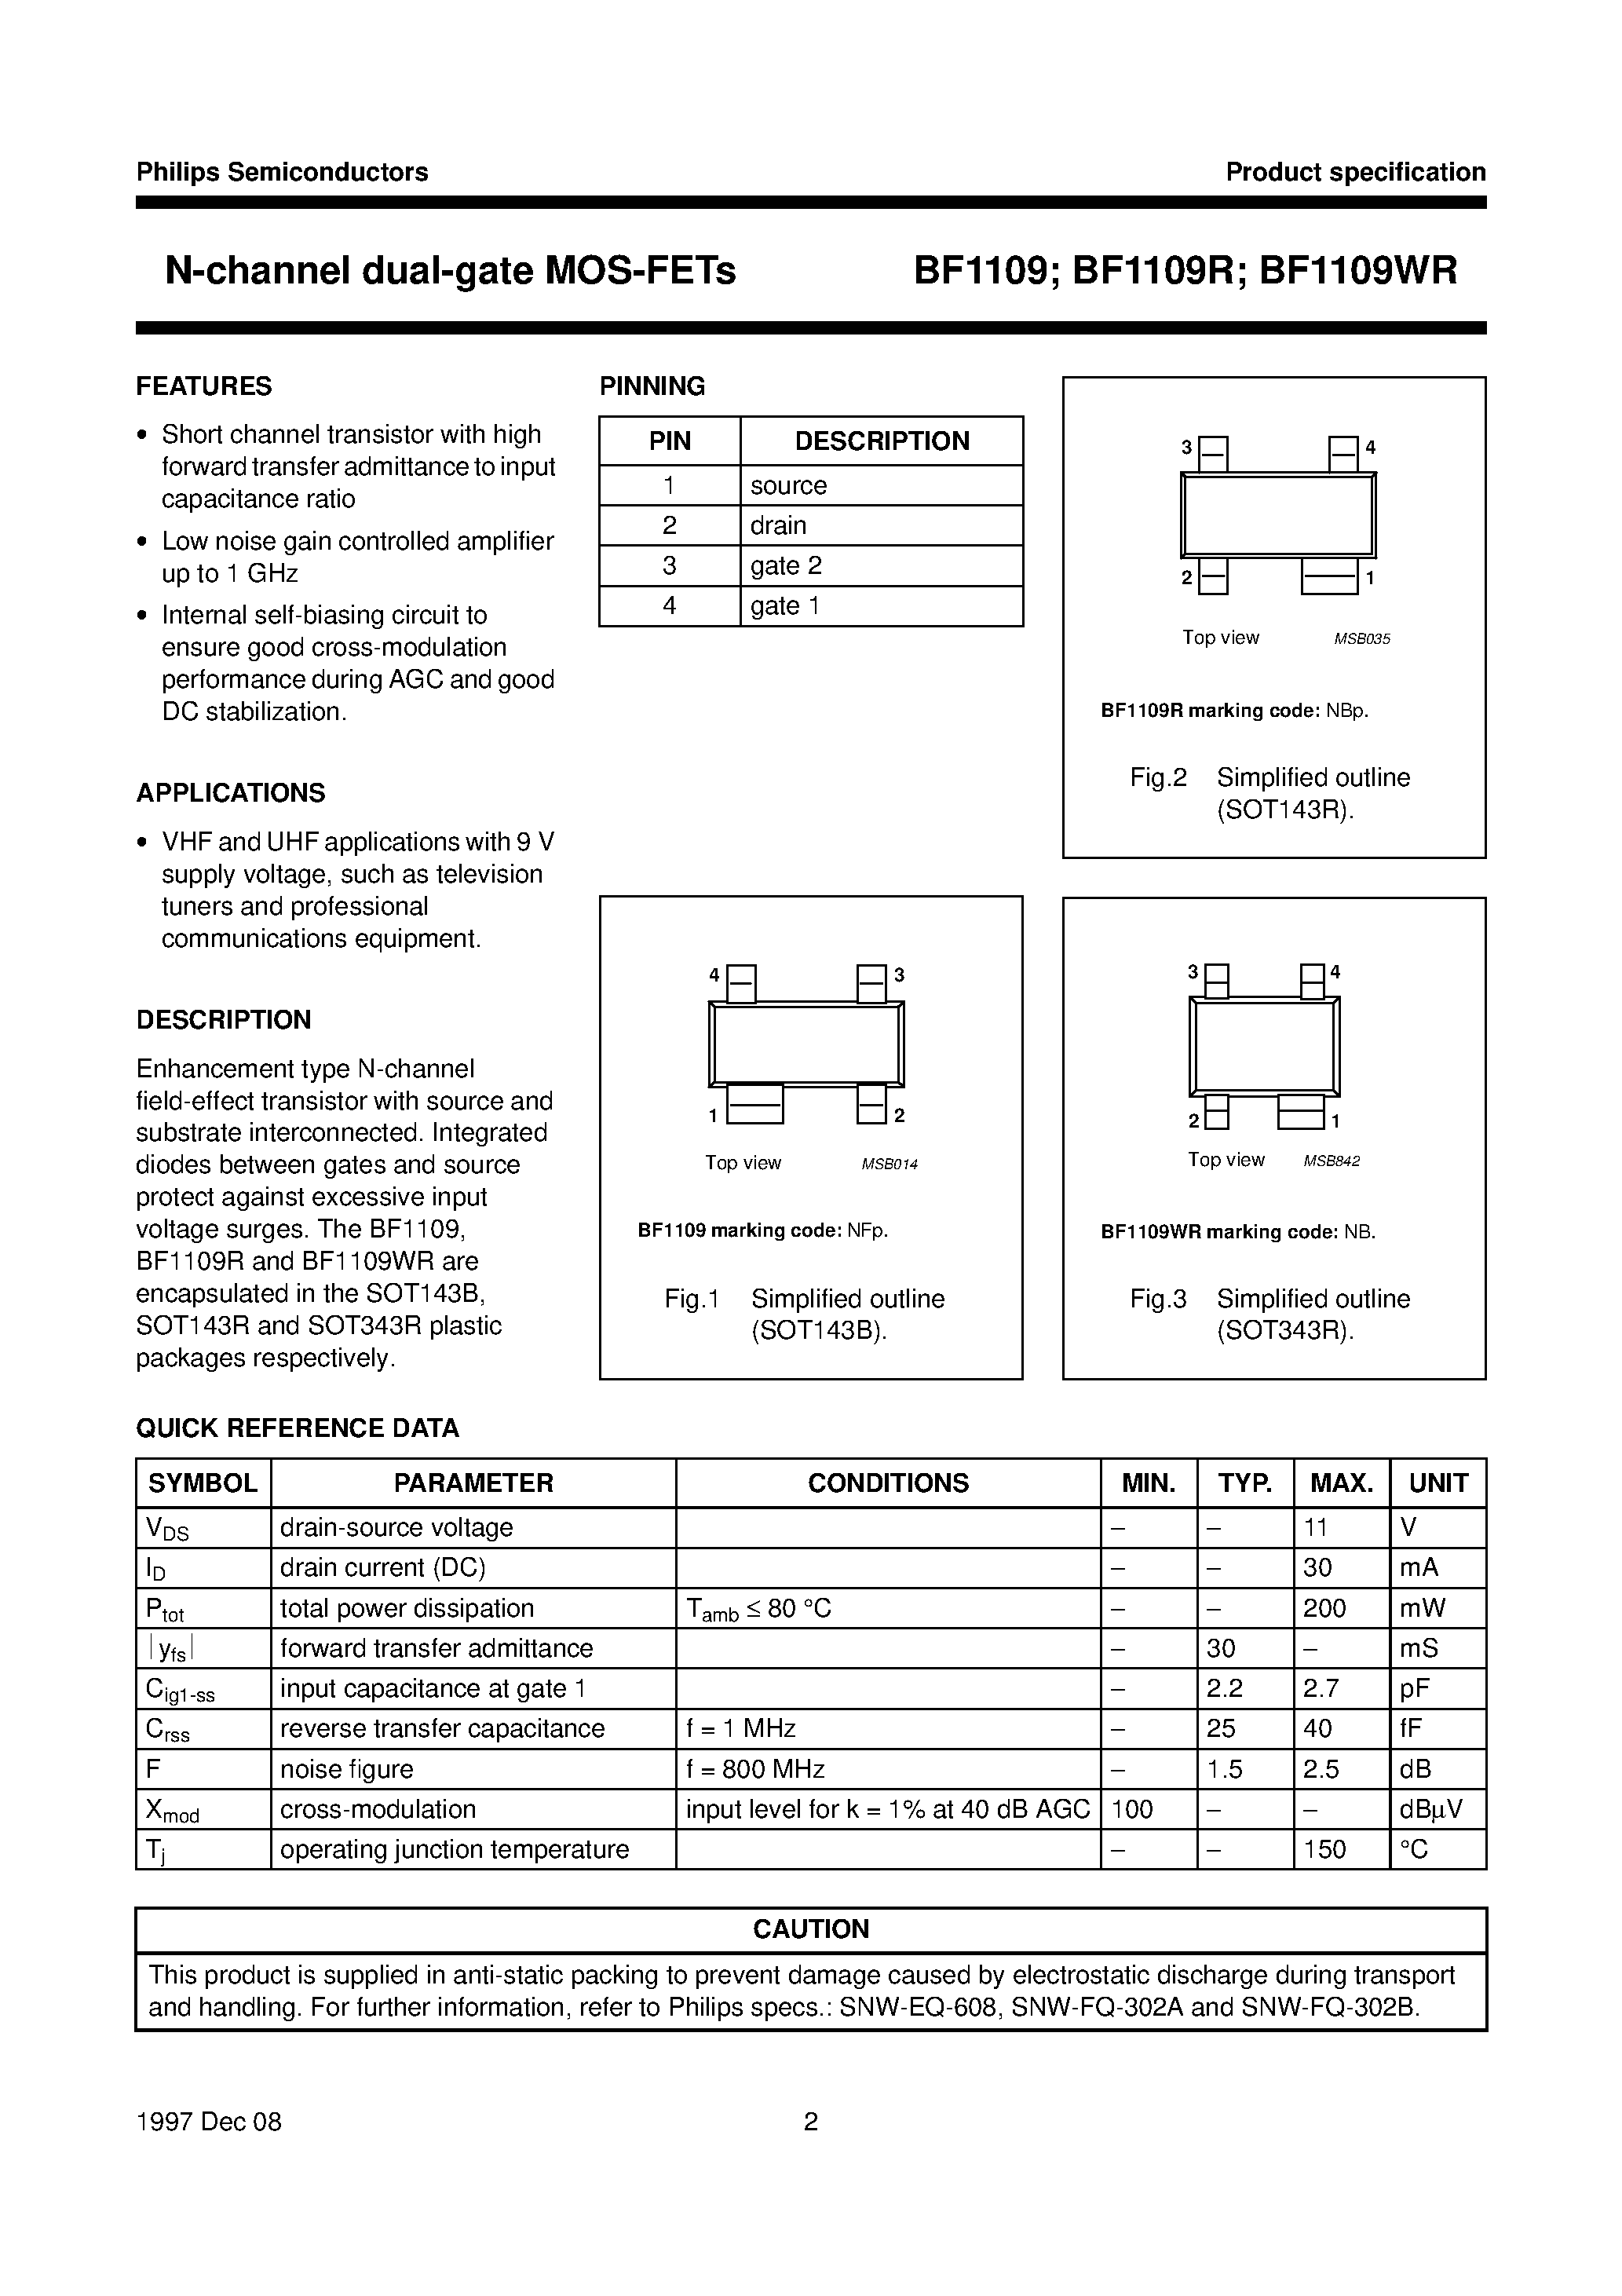 Datasheet BF1109R - N-channel dual-gate MOS-FETs page 2